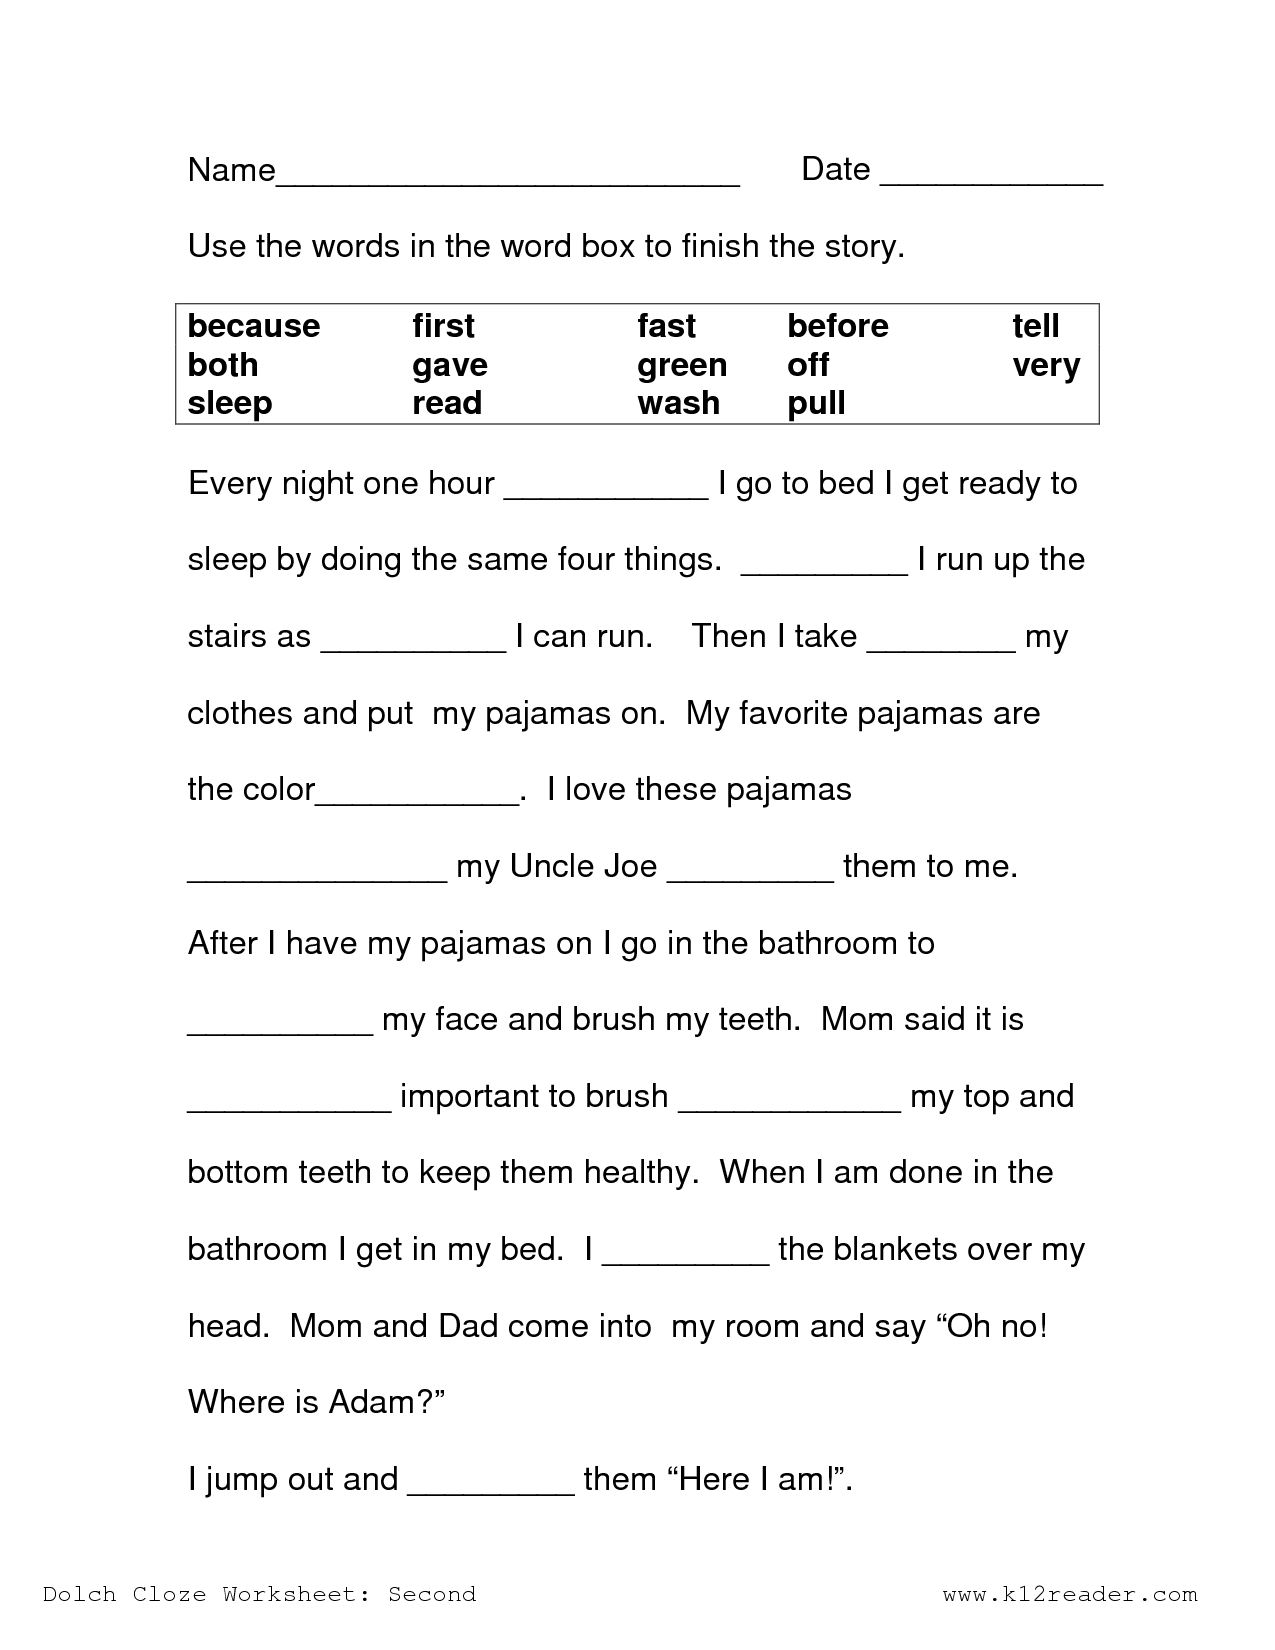 17-best-images-of-second-grade-making-inferences-worksheets-inference-graphic-organizer